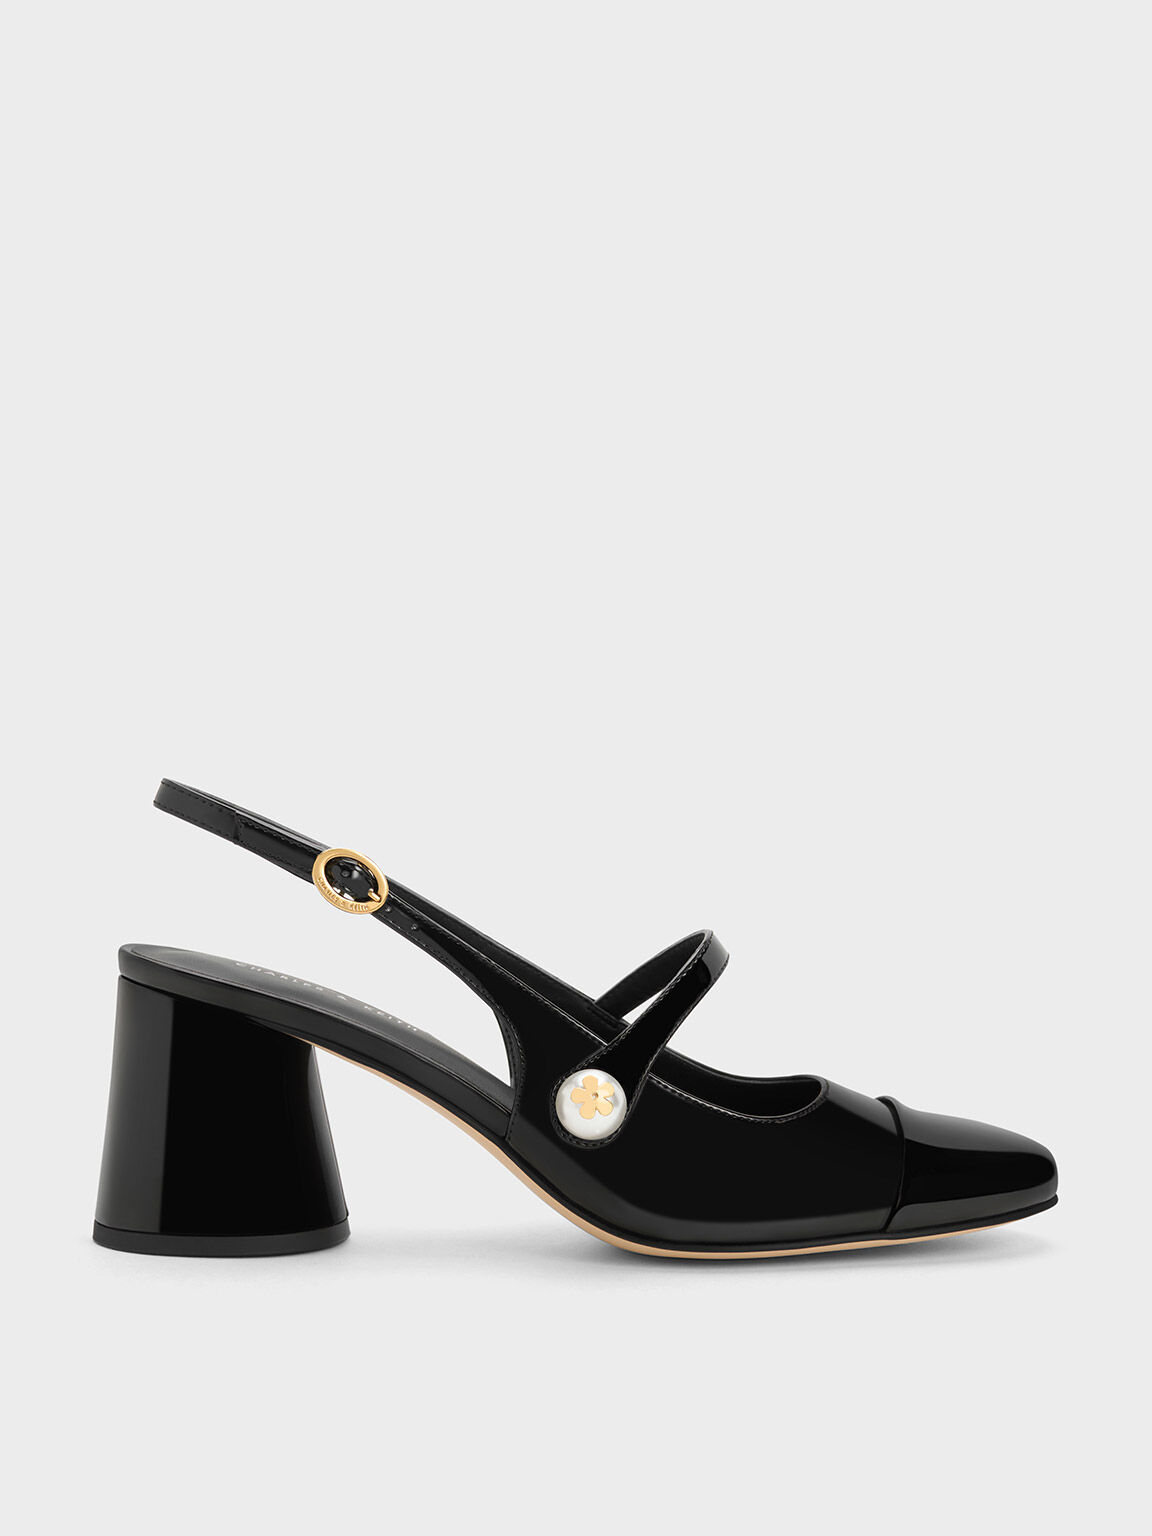 Black Slingback Mary Jane Flats | CHARLES & KEITH | Dressy shoes, Classy  shoes, Shoes heels classy